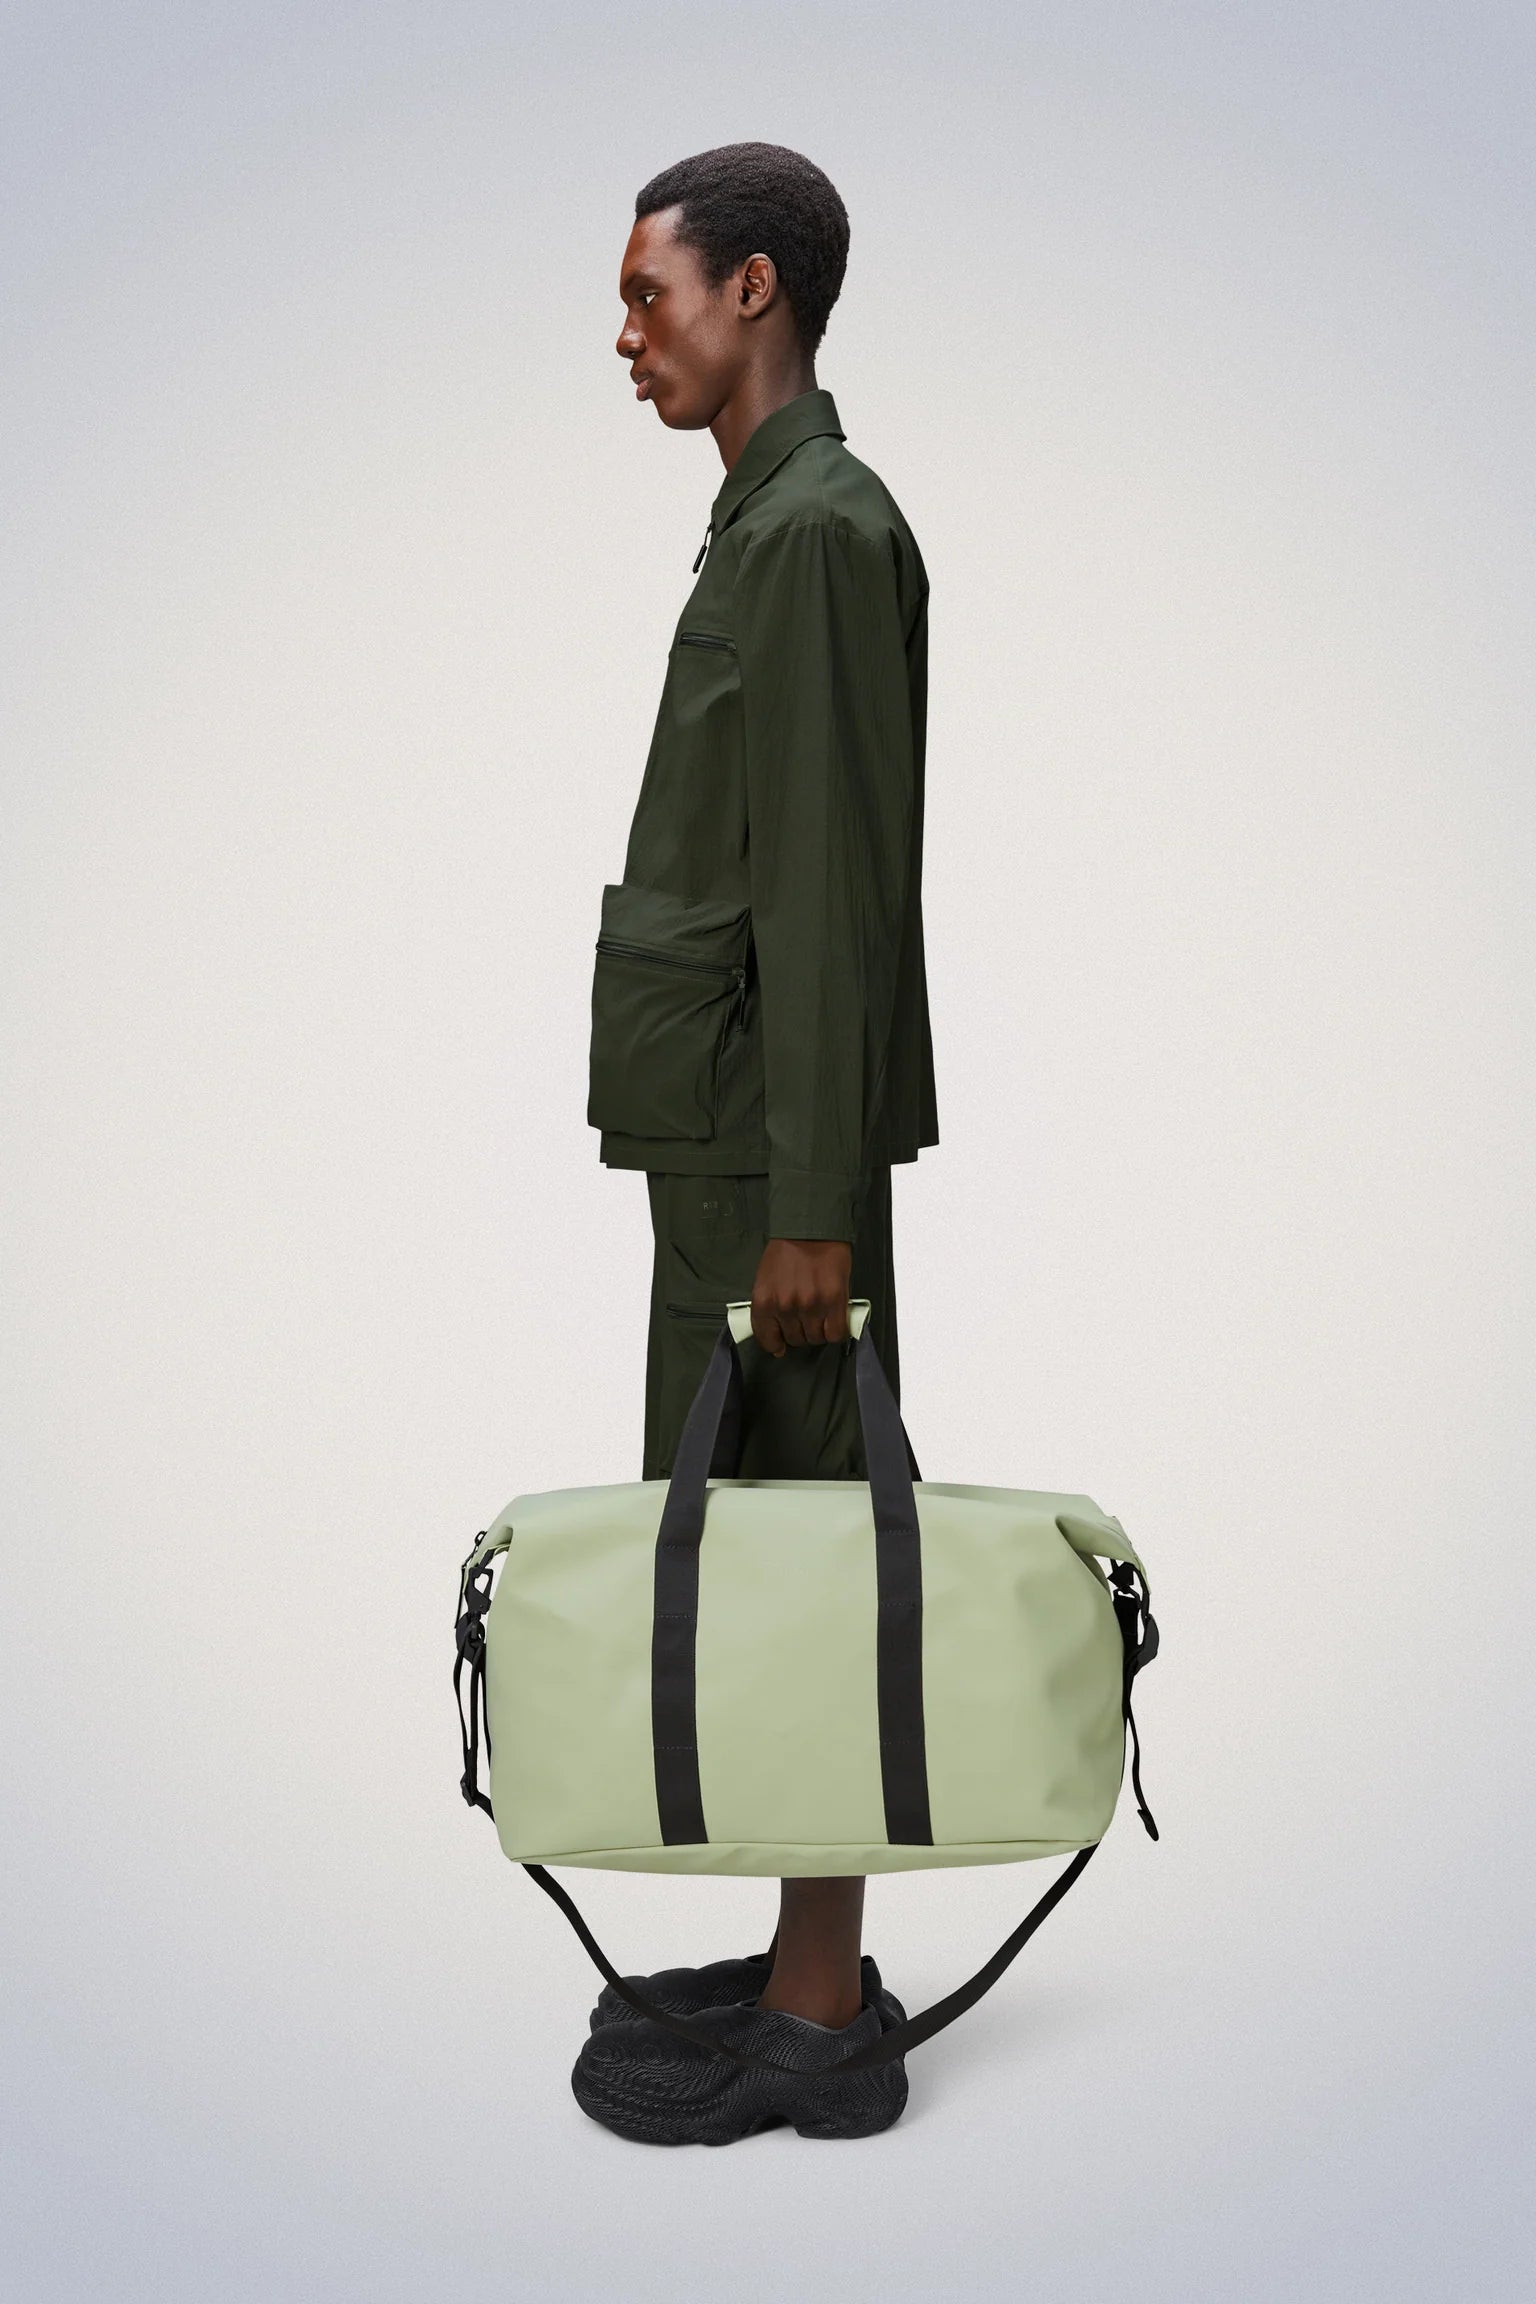 A man is holding a Rains Hilo Weekend Bag, his travel-favourite overnight bag, which happens to be green in color.